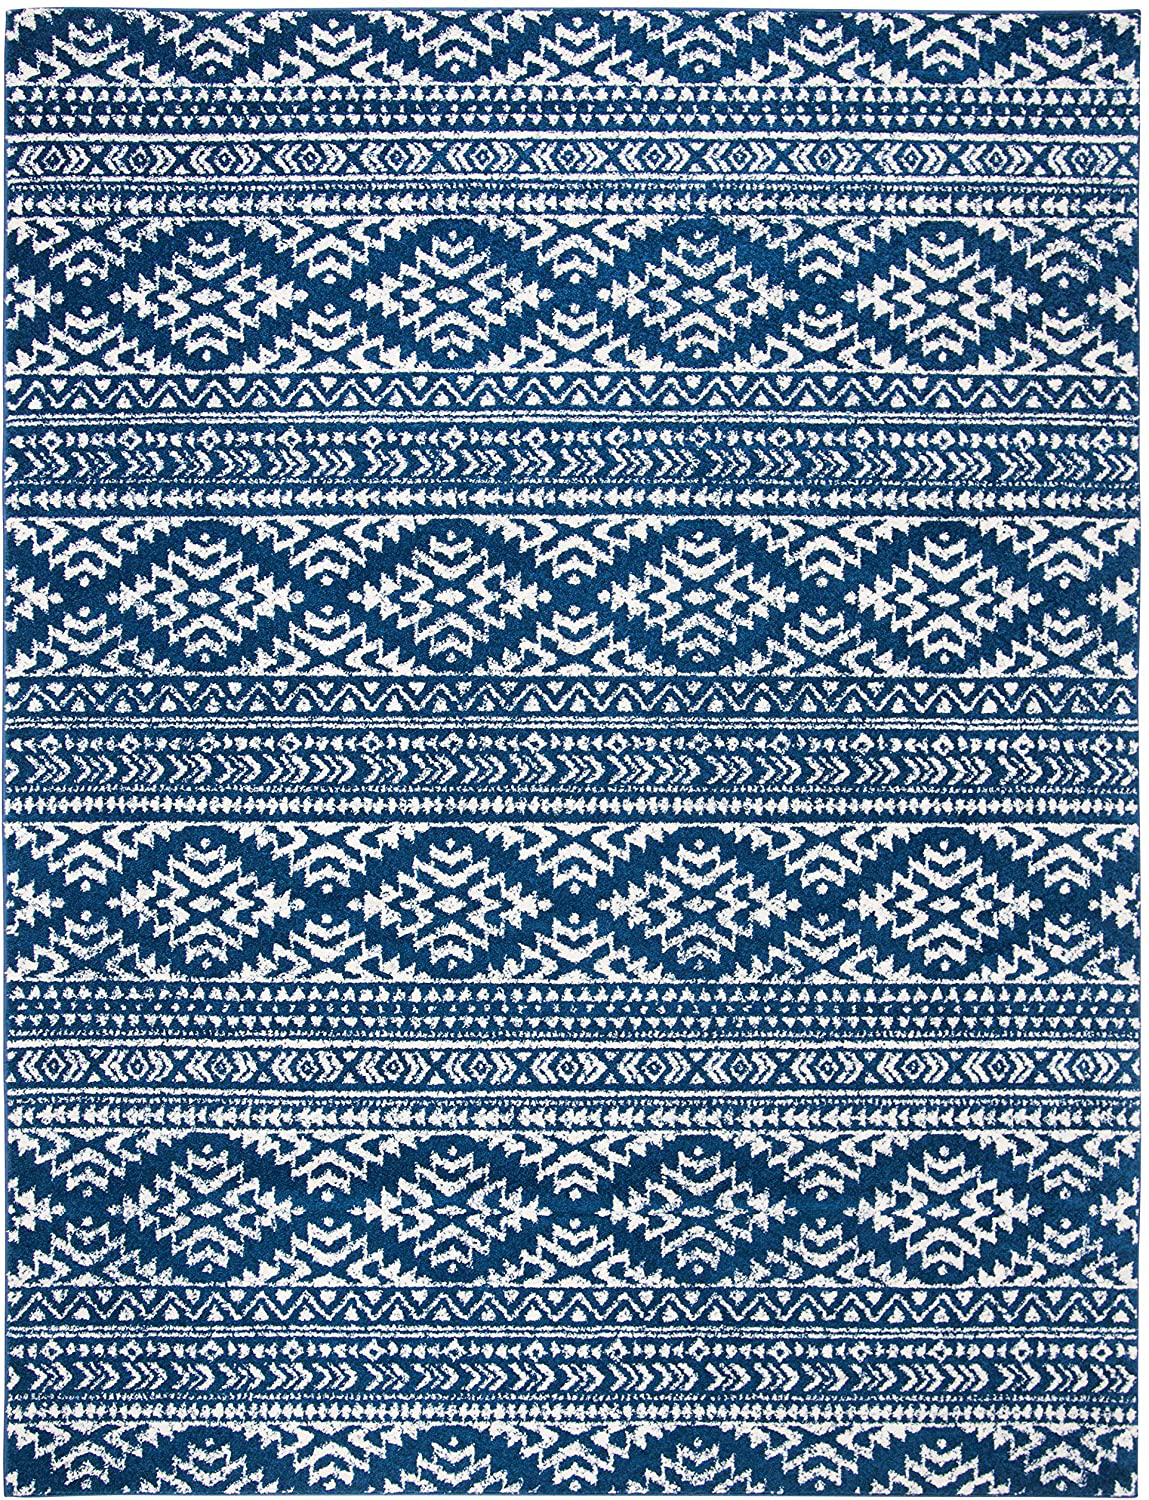 Safavieh Tulum Collection TUL272E Moroccan Boho Tribal Non-Shedding Stain Resistant Living Room Bedroom Area Rug, 6' x 9', Ivory / Turquoise